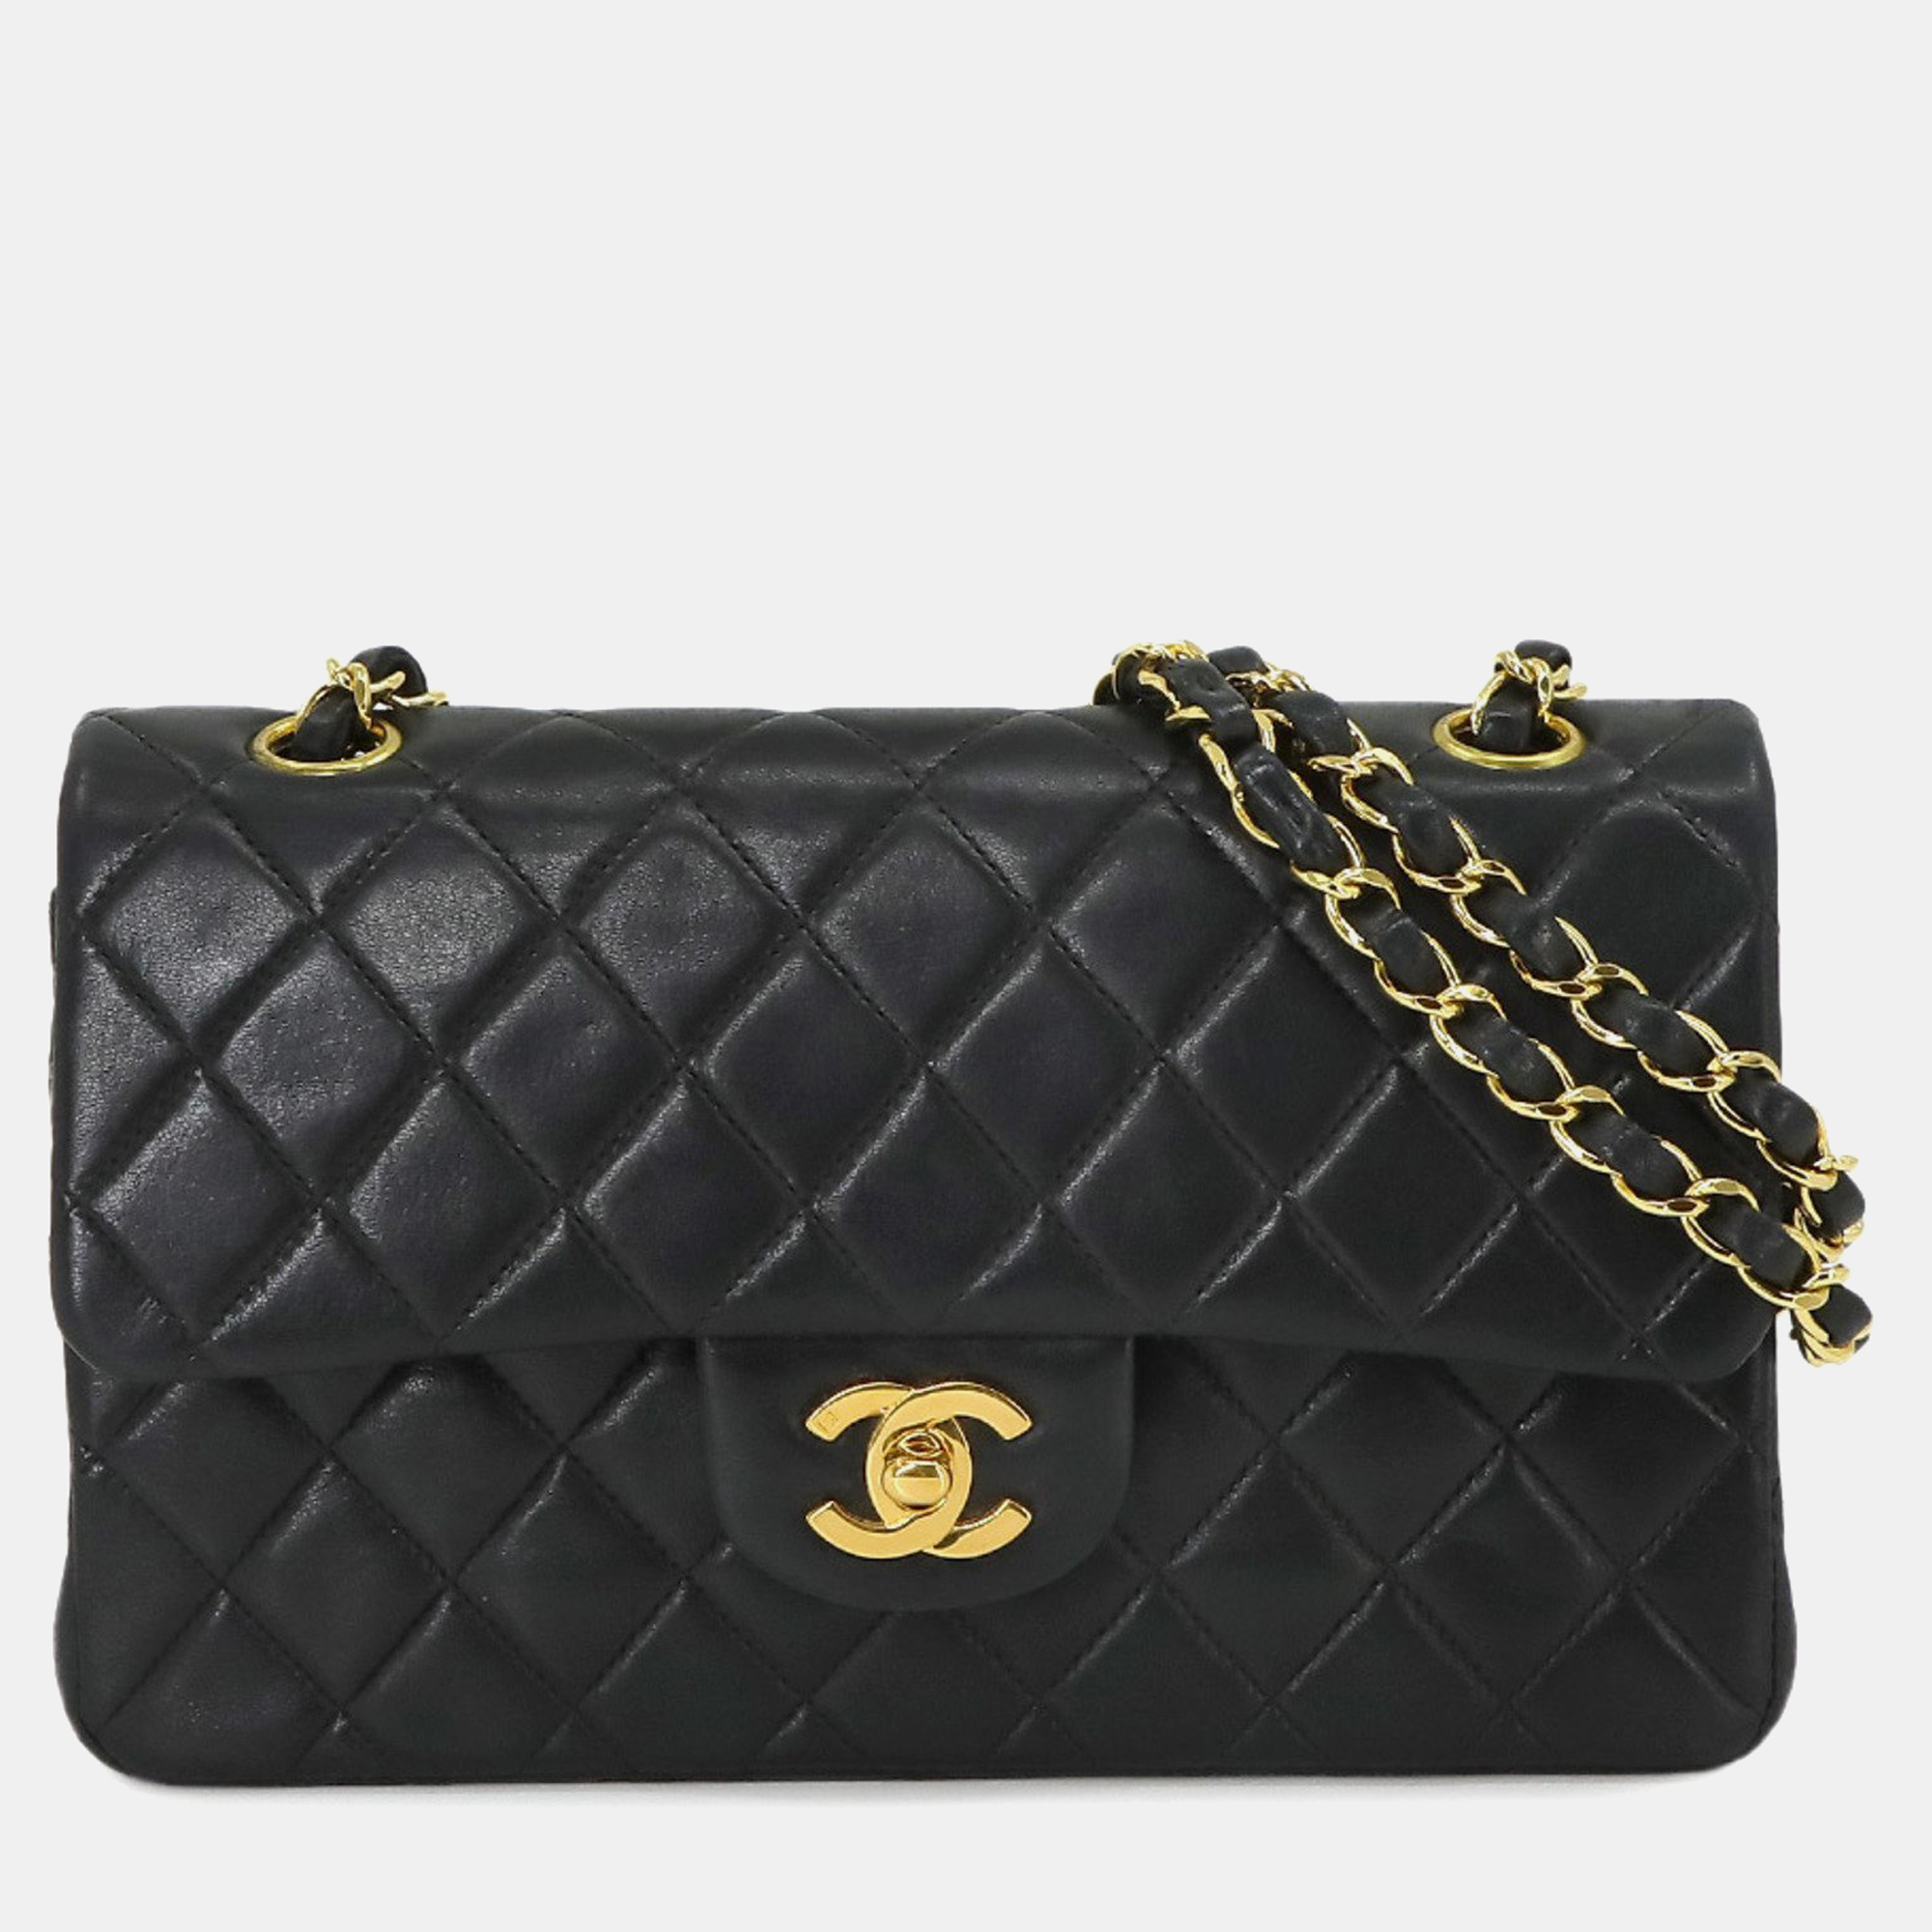 Chanel  lambskin leather medium classic double flap shoulder bags